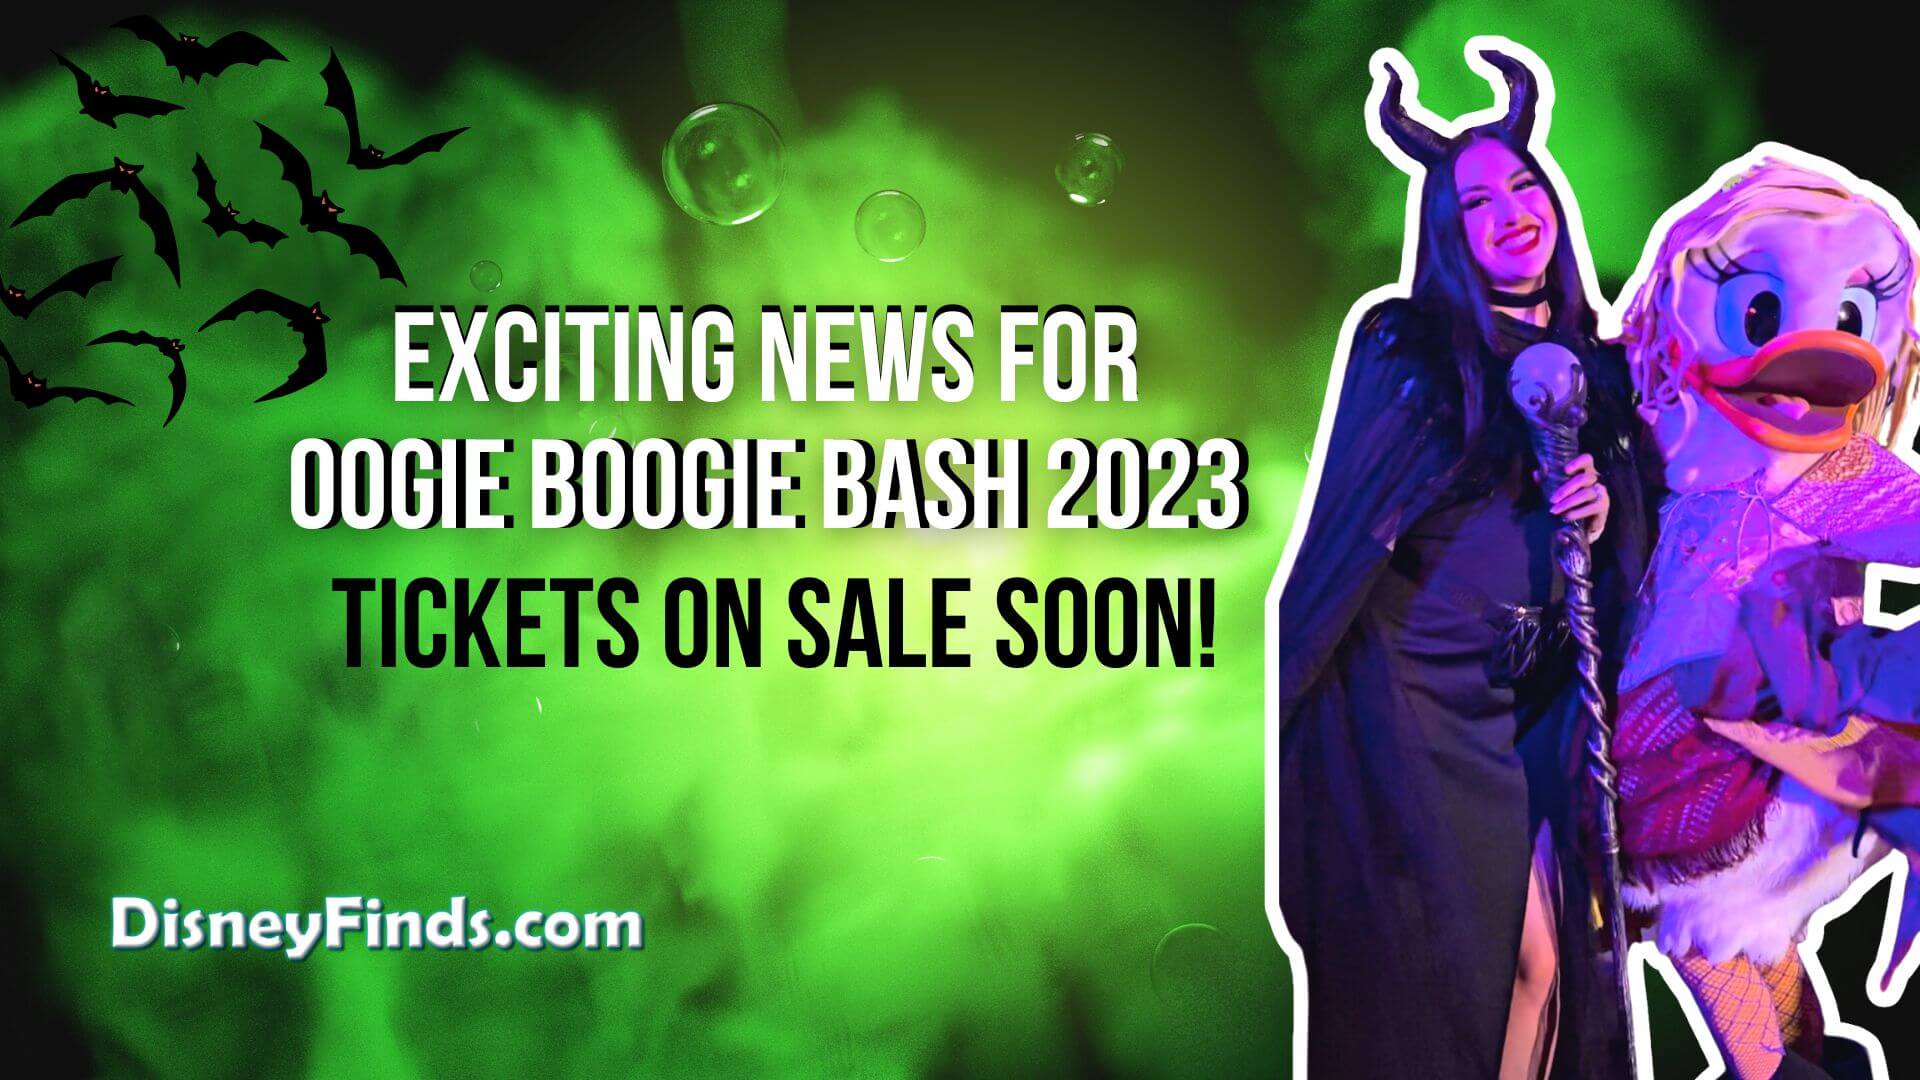 Exciting News for Disney Fans Oogie Boogie Bash Tickets for 2023 on